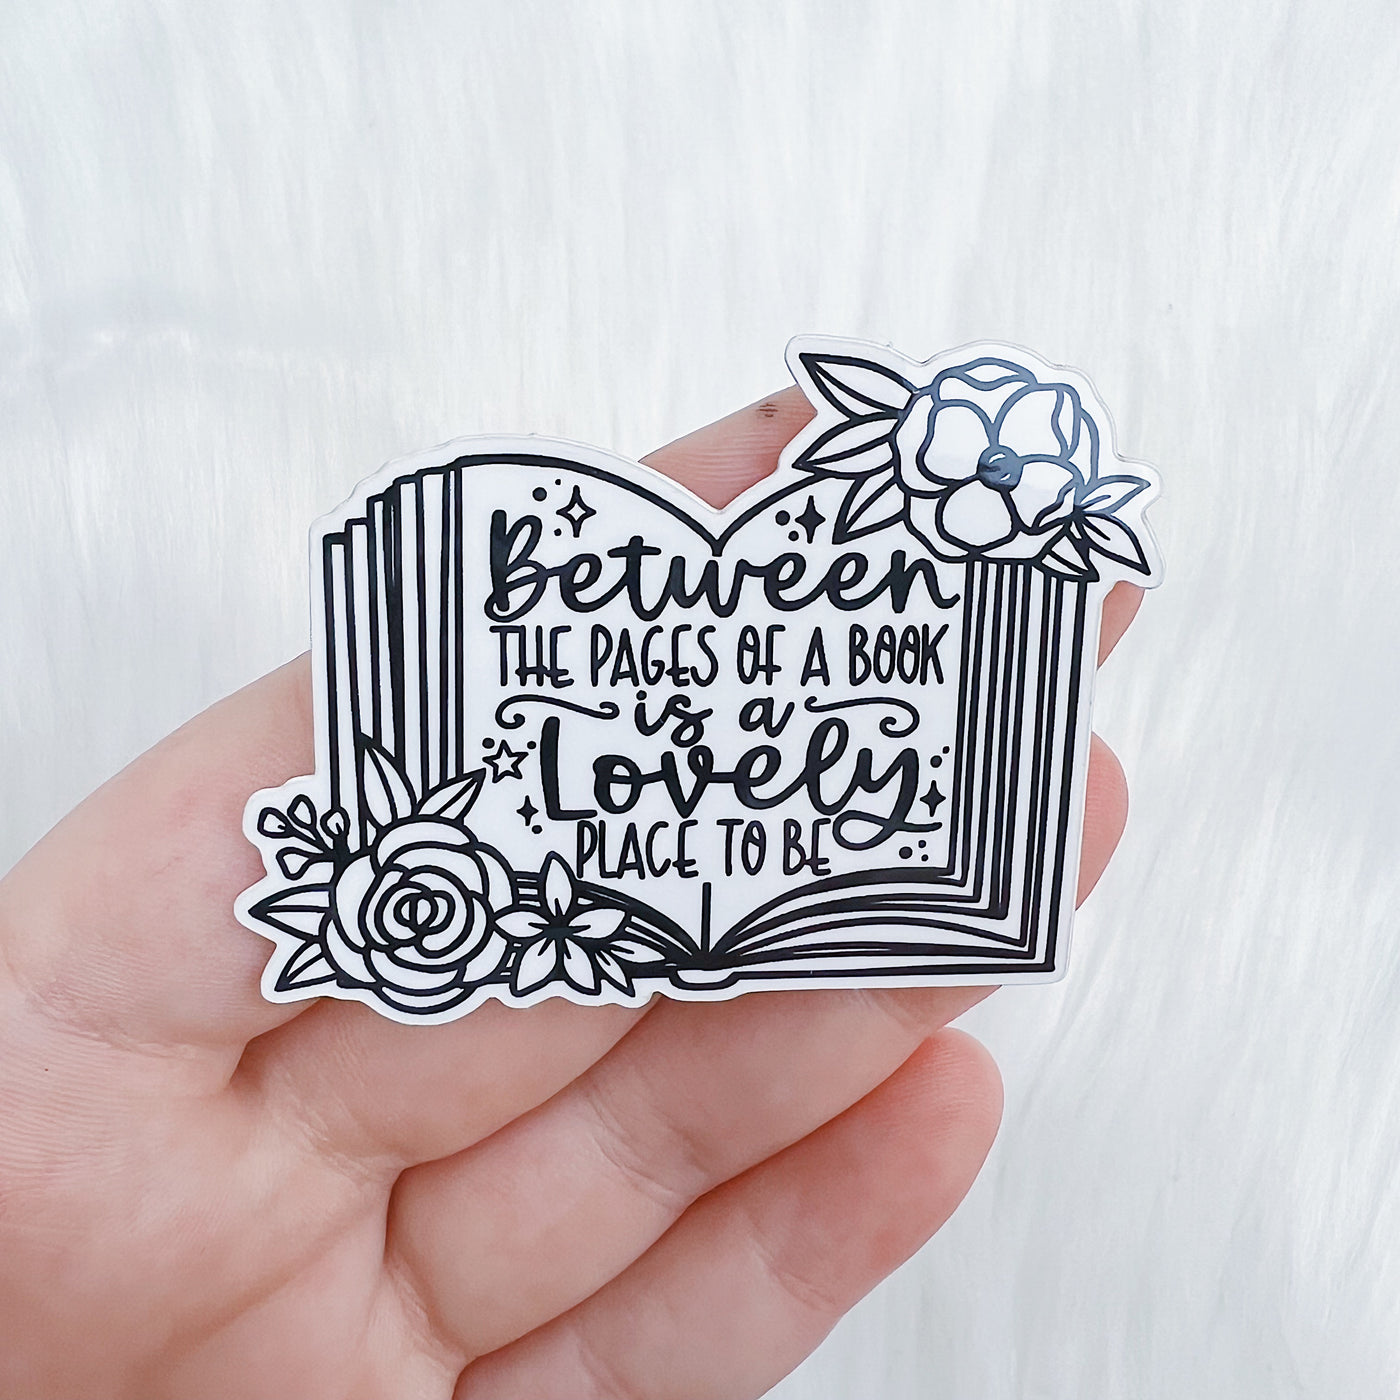 Between The Pages Is A Lovely Place To Be Vinyl Sticker Die Cut